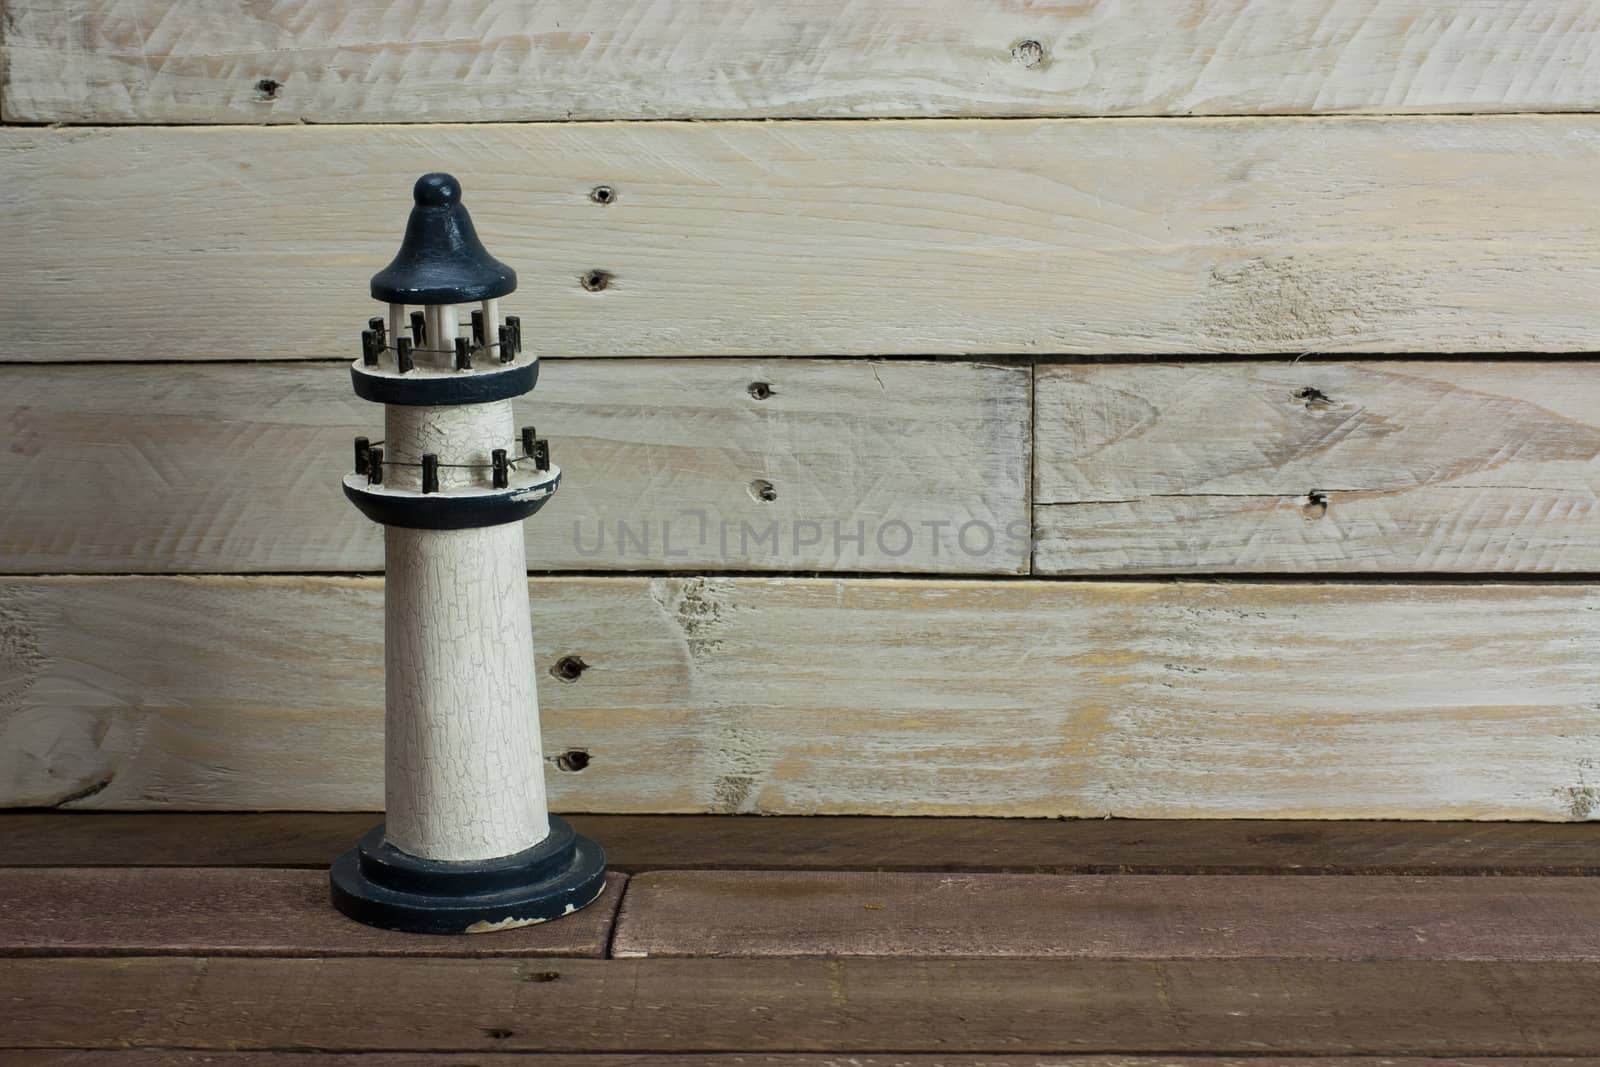 Lighthouse set against a worn wooden background